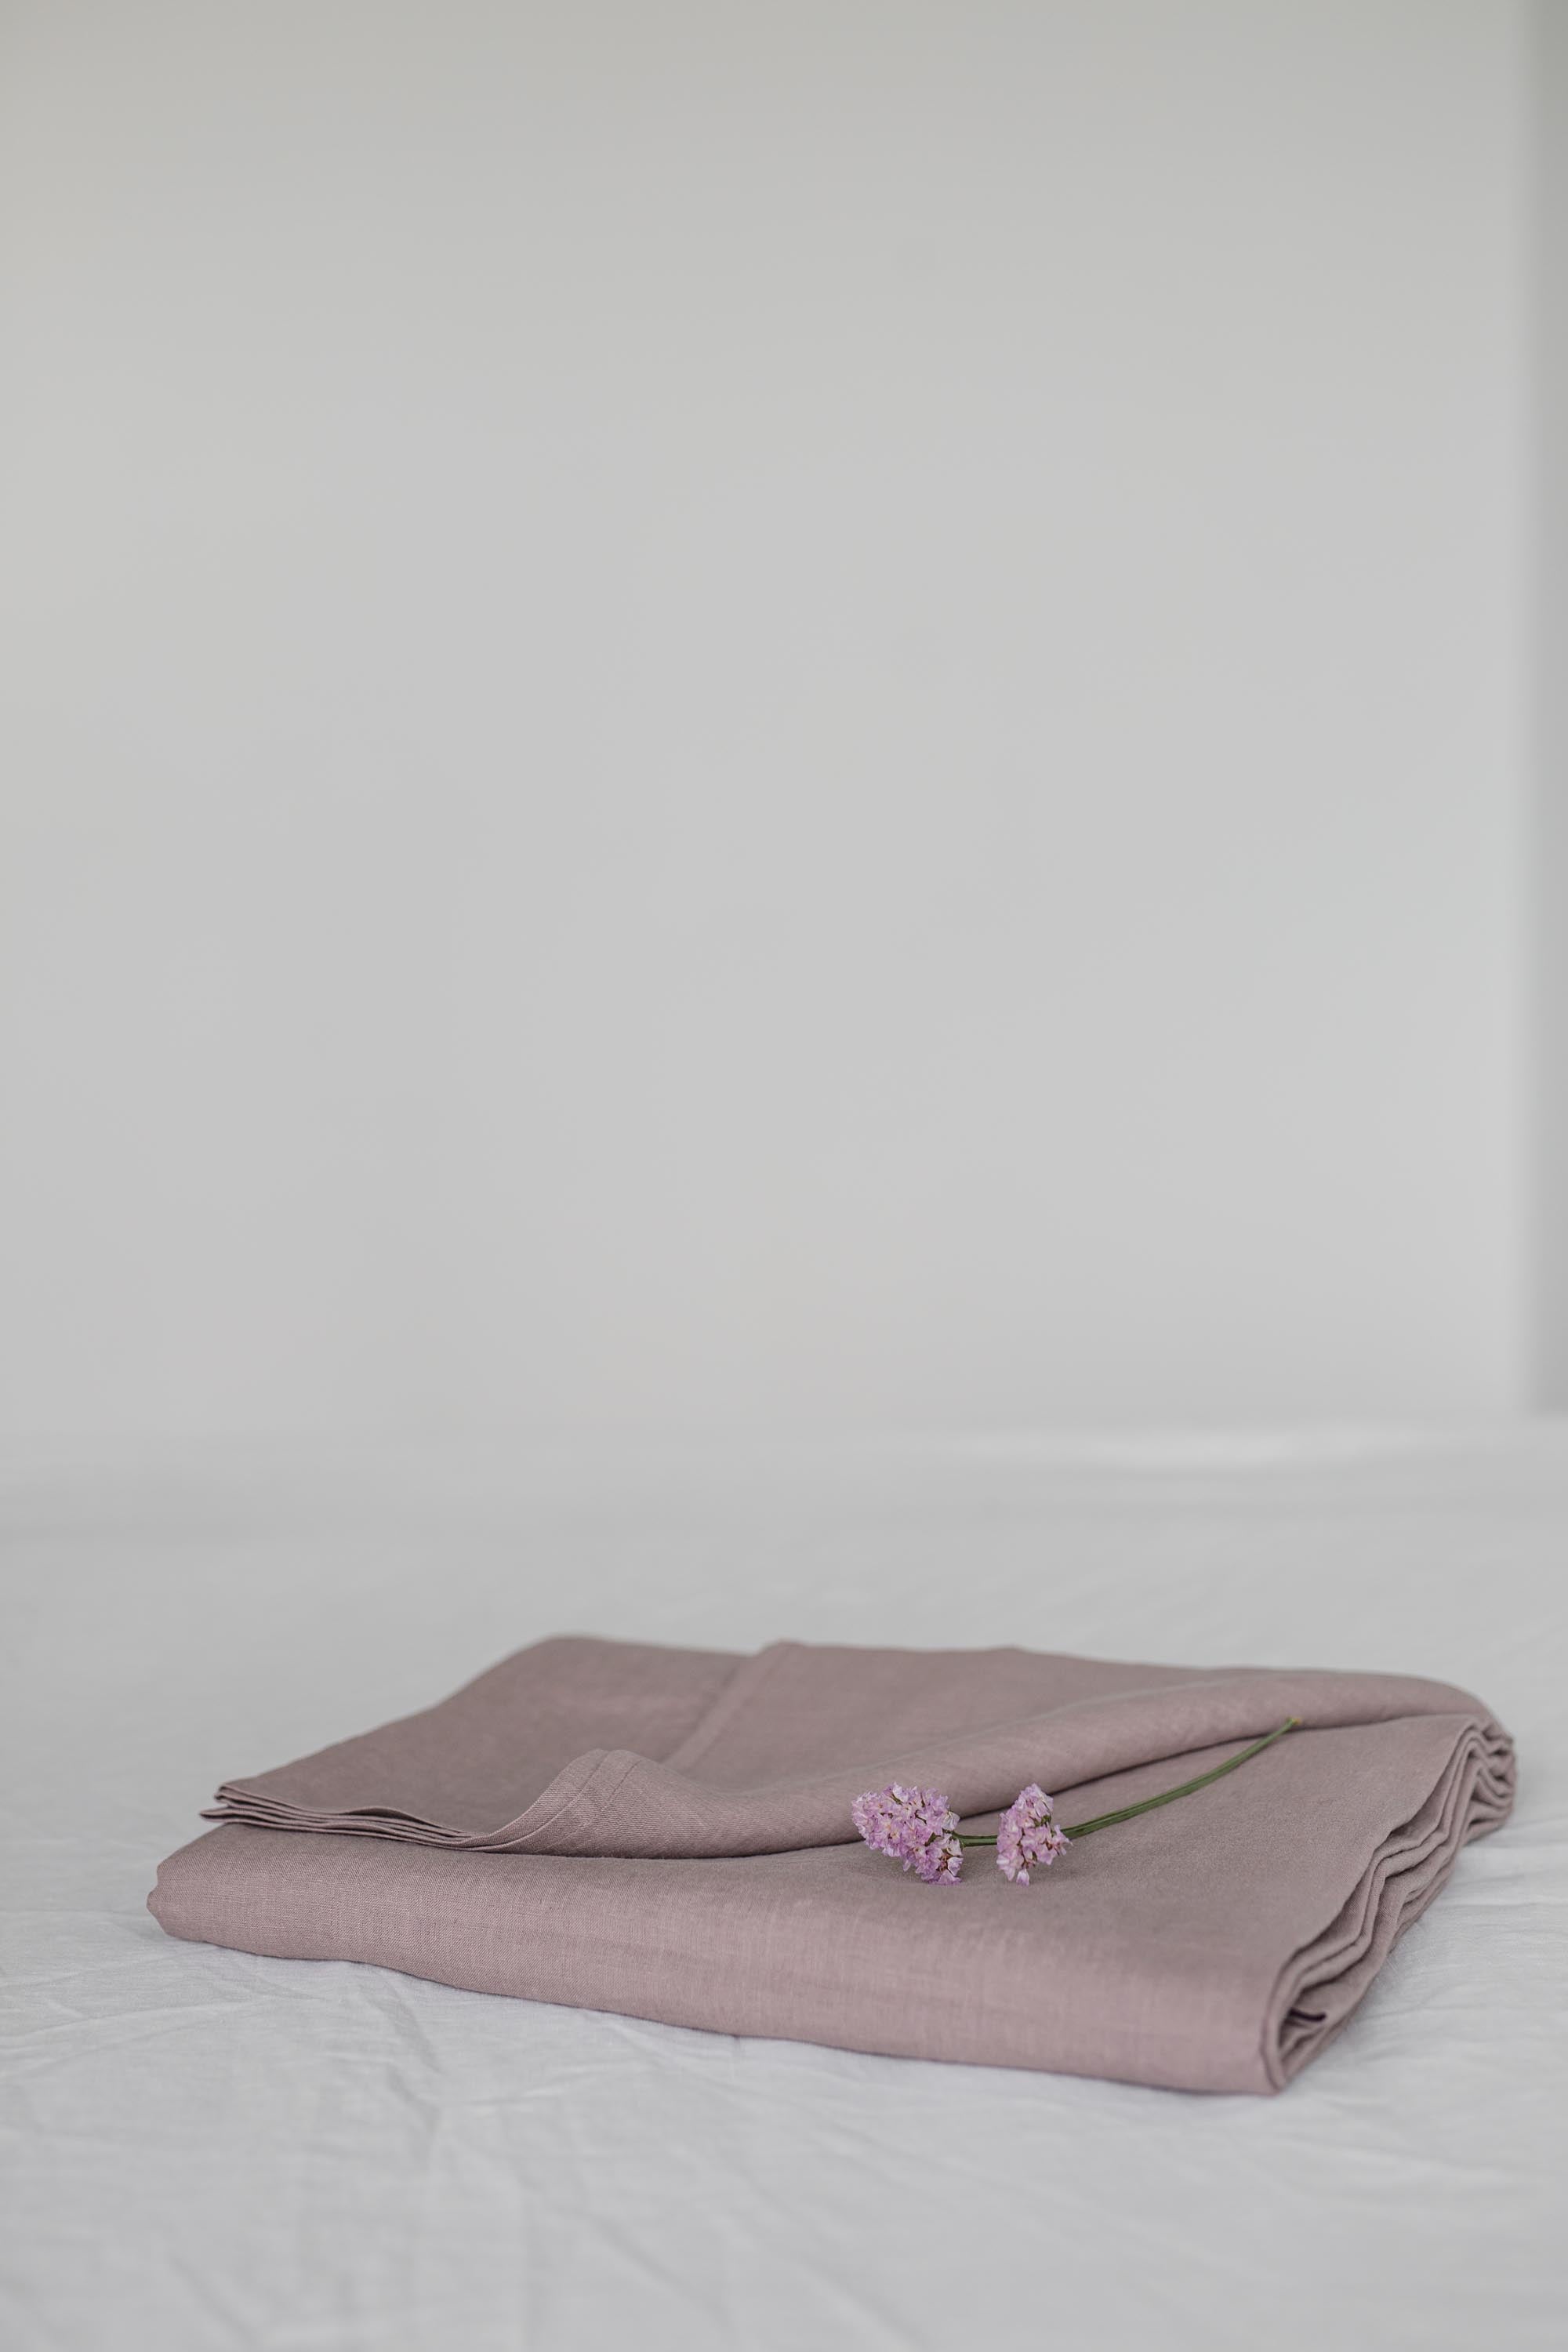 Linen Flat Sheets In Rosy Brown With A Few Flowers By AmourlInen